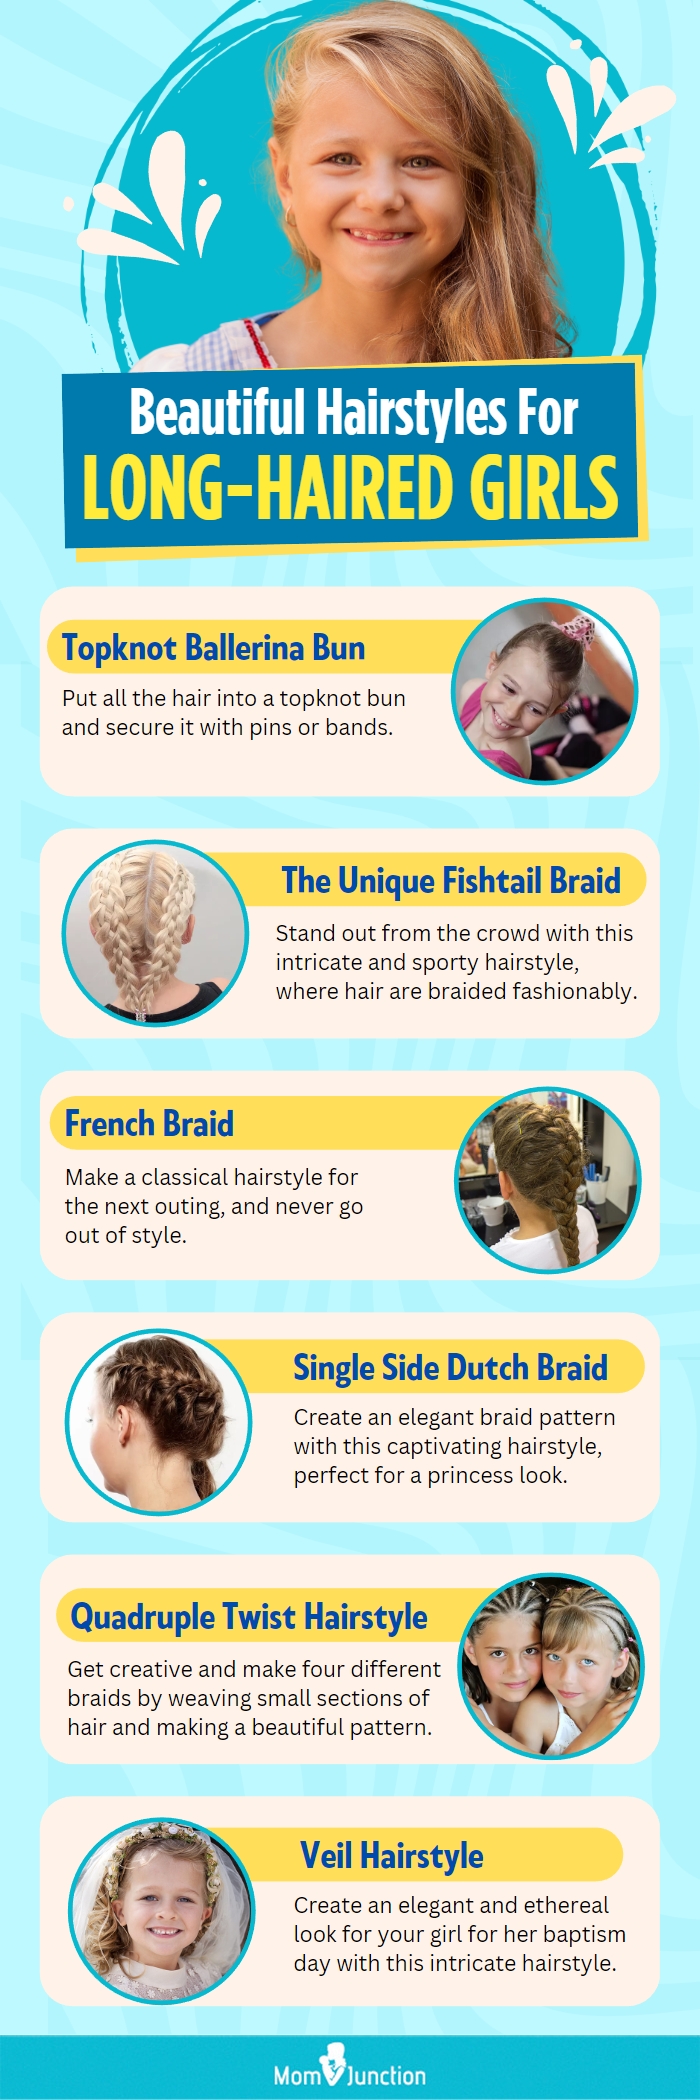 4 Quick (and easy) Hairstyles for Busy Women on the Go – Lunata Beauty